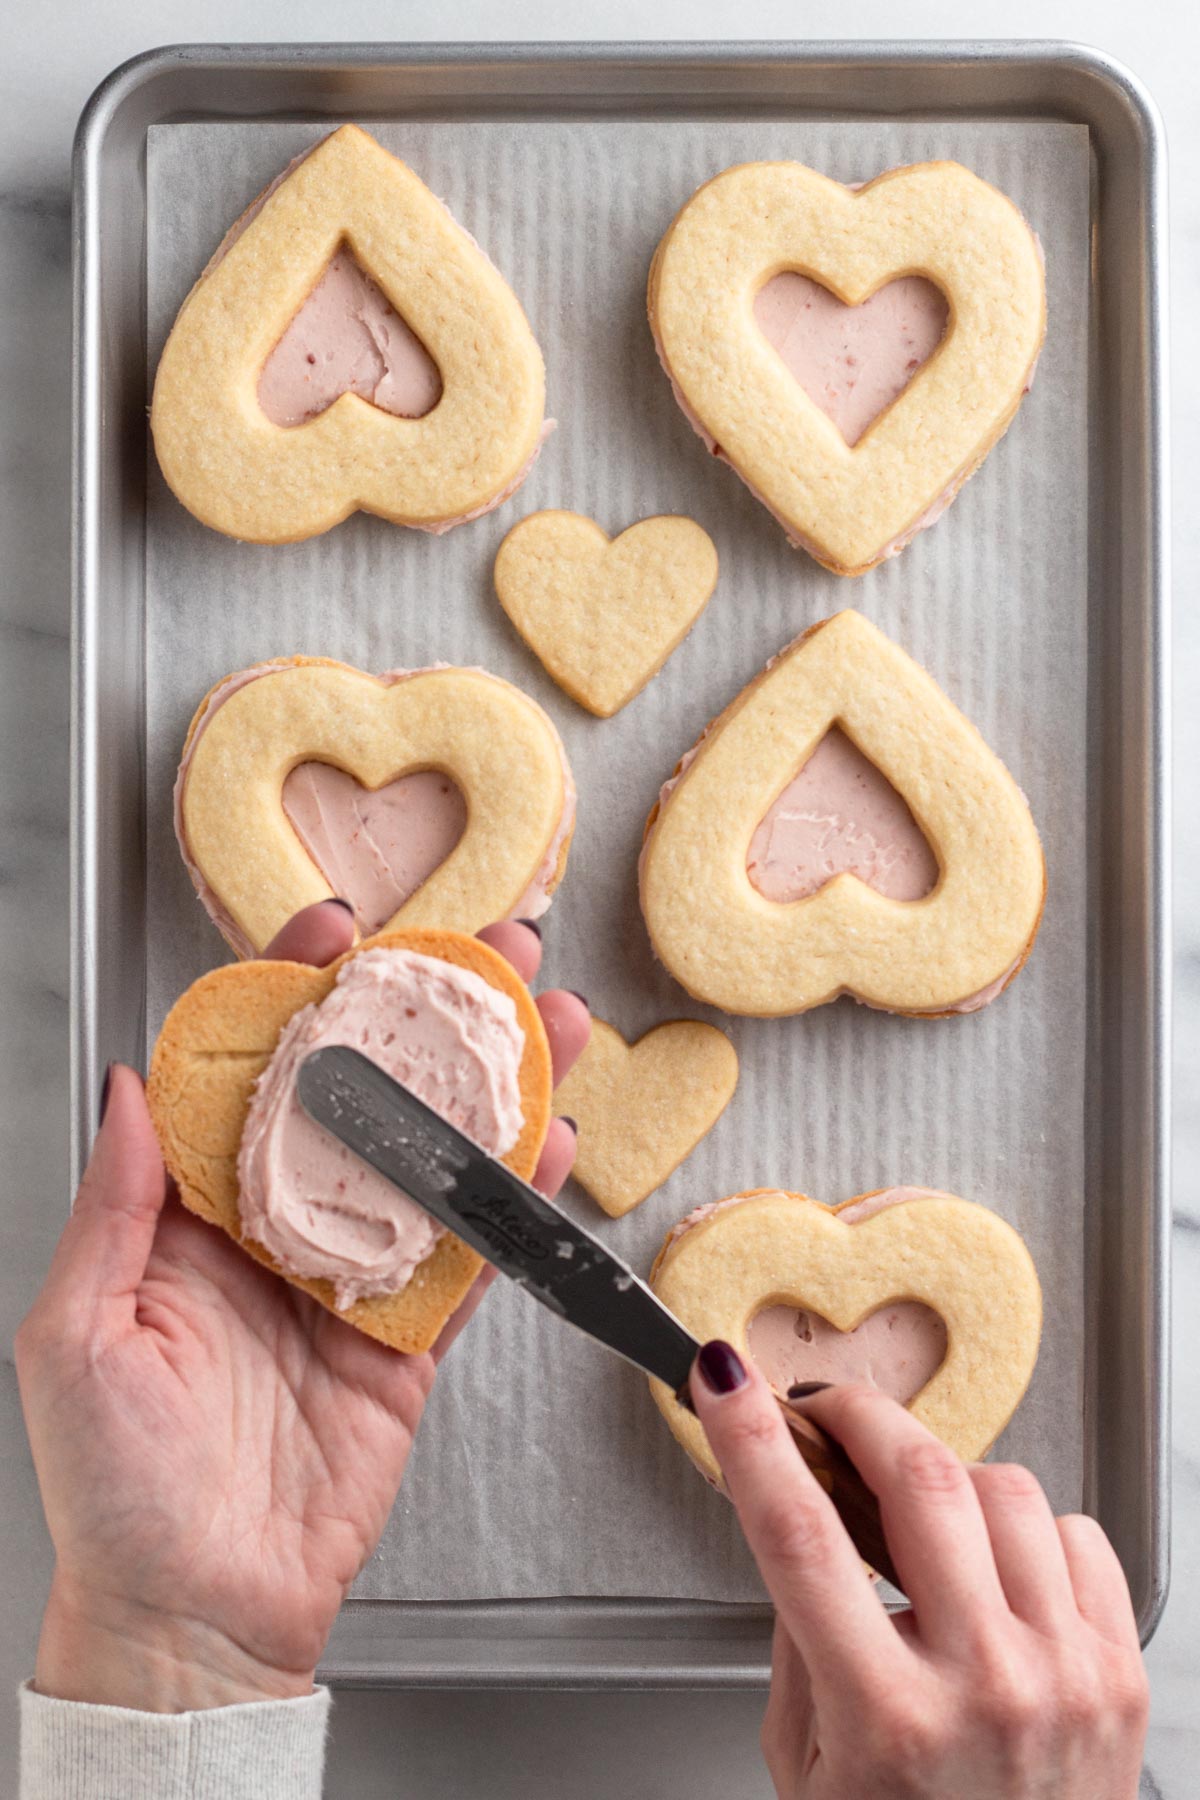 Hands holding sugar cookie and spreading frosting onto the cookie using an icing spatula.